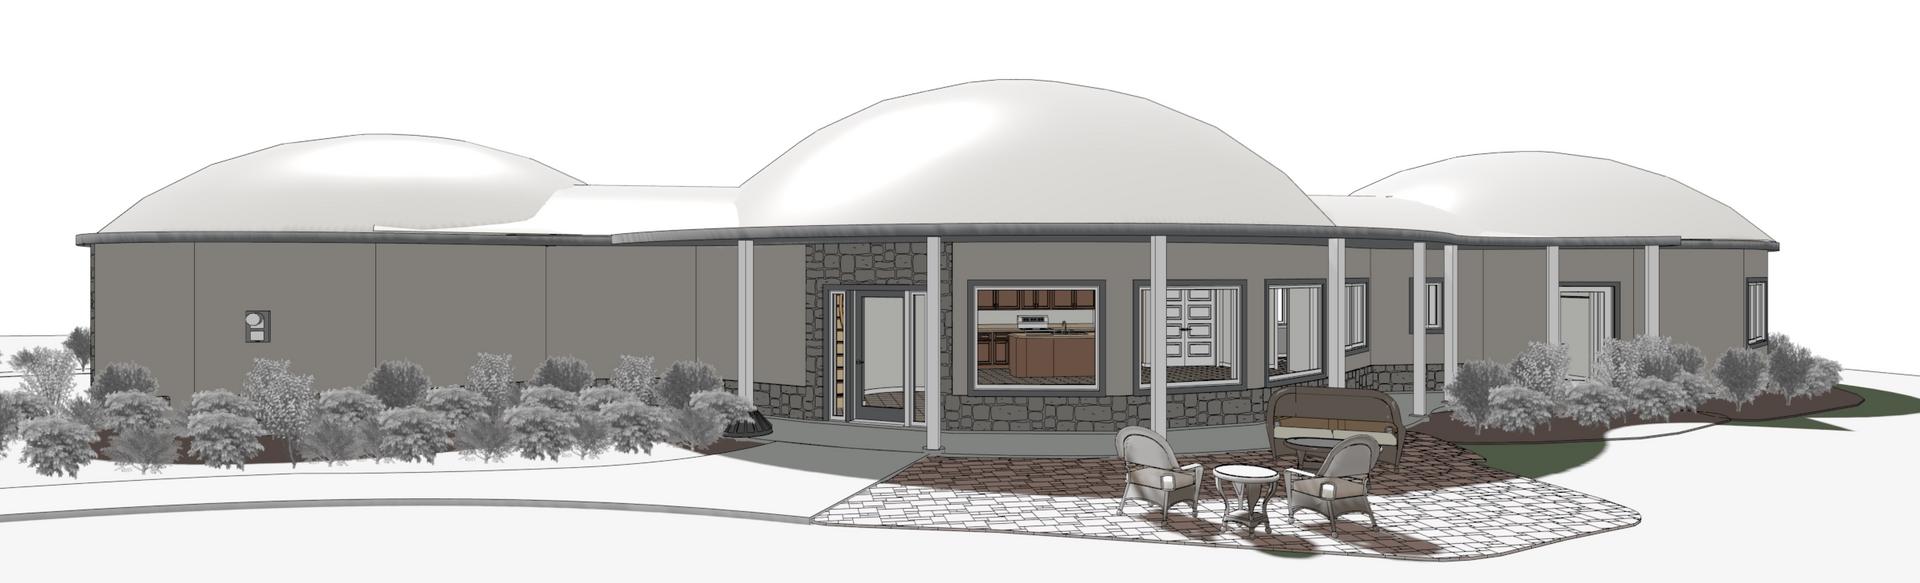 Rendering of Arcadia Dome Home.